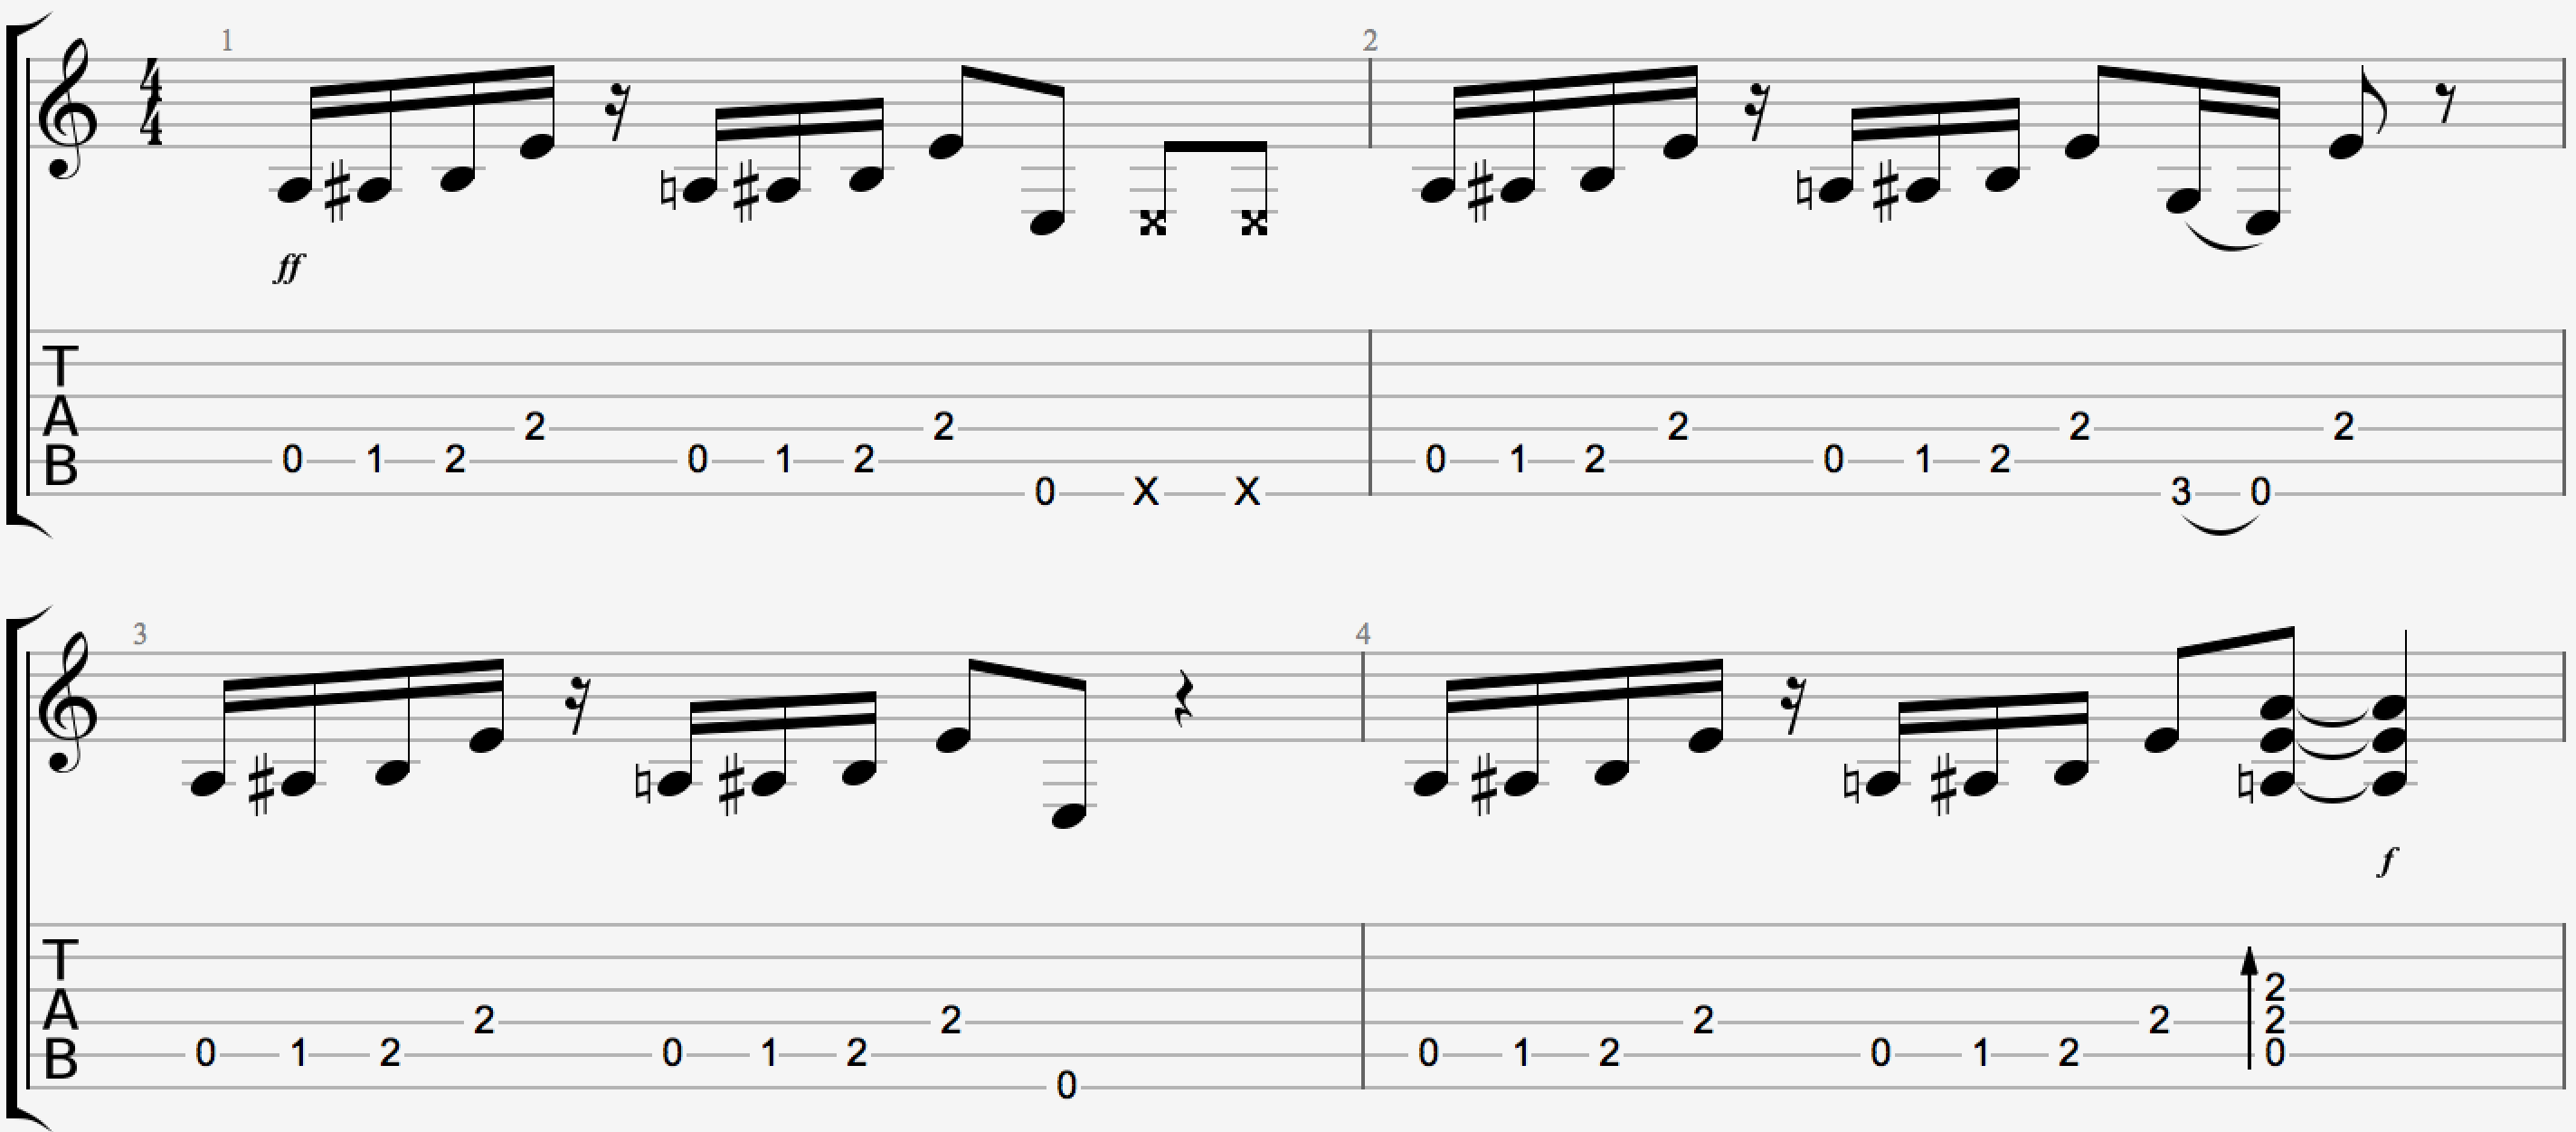 Lots of cool chromaticism in Walk This Wat